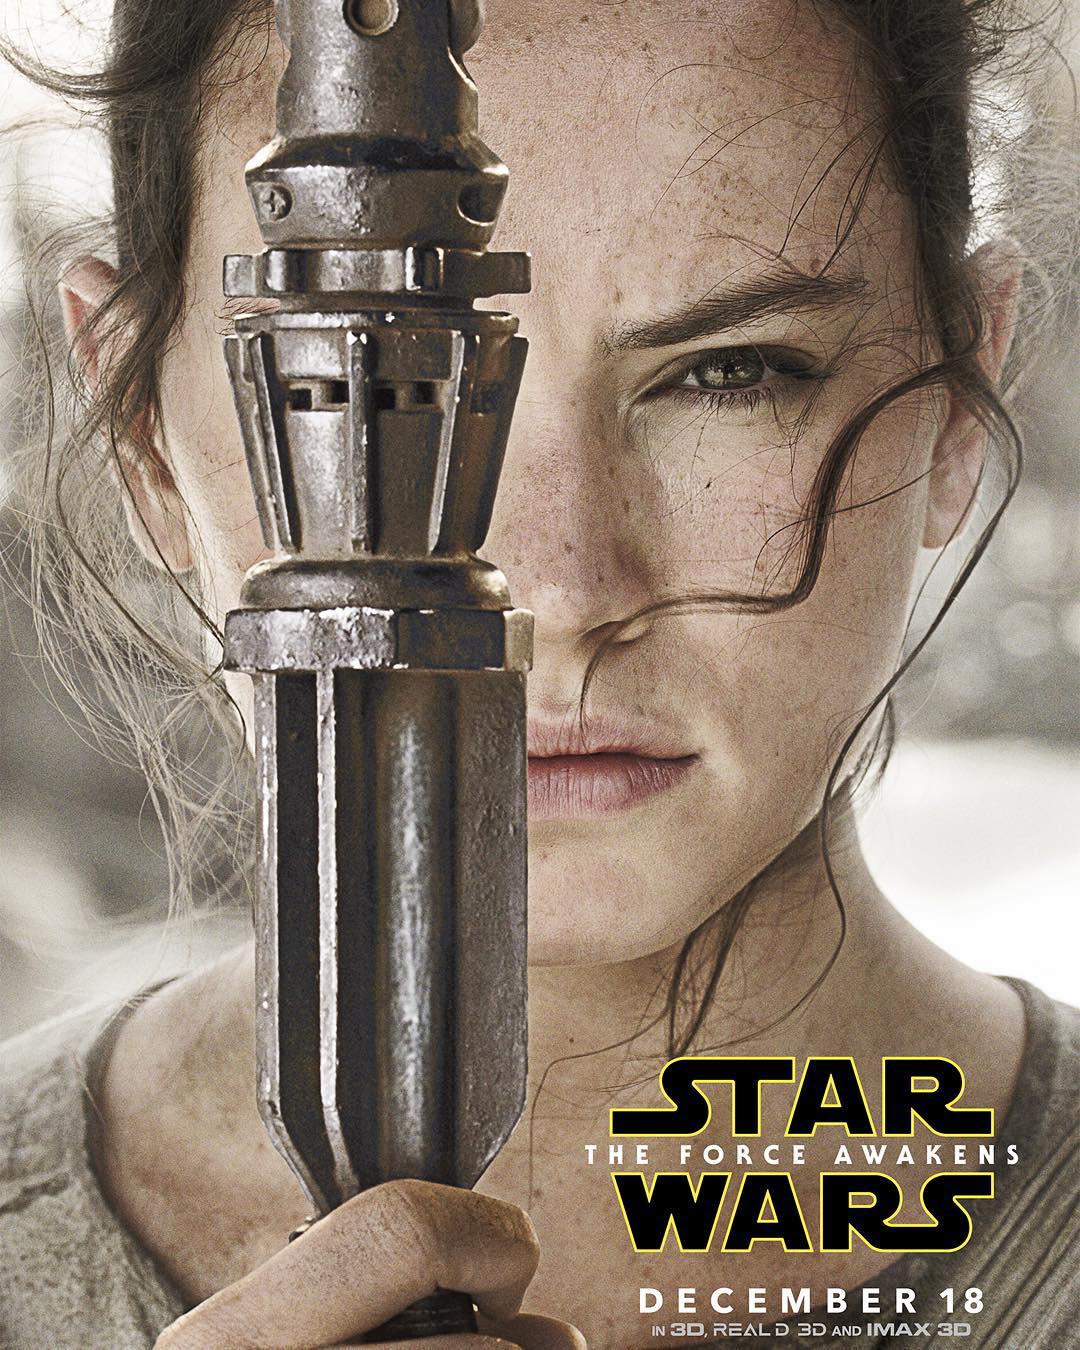 Rey Daisy Ridley Star Wars The Force Awakens movie poster